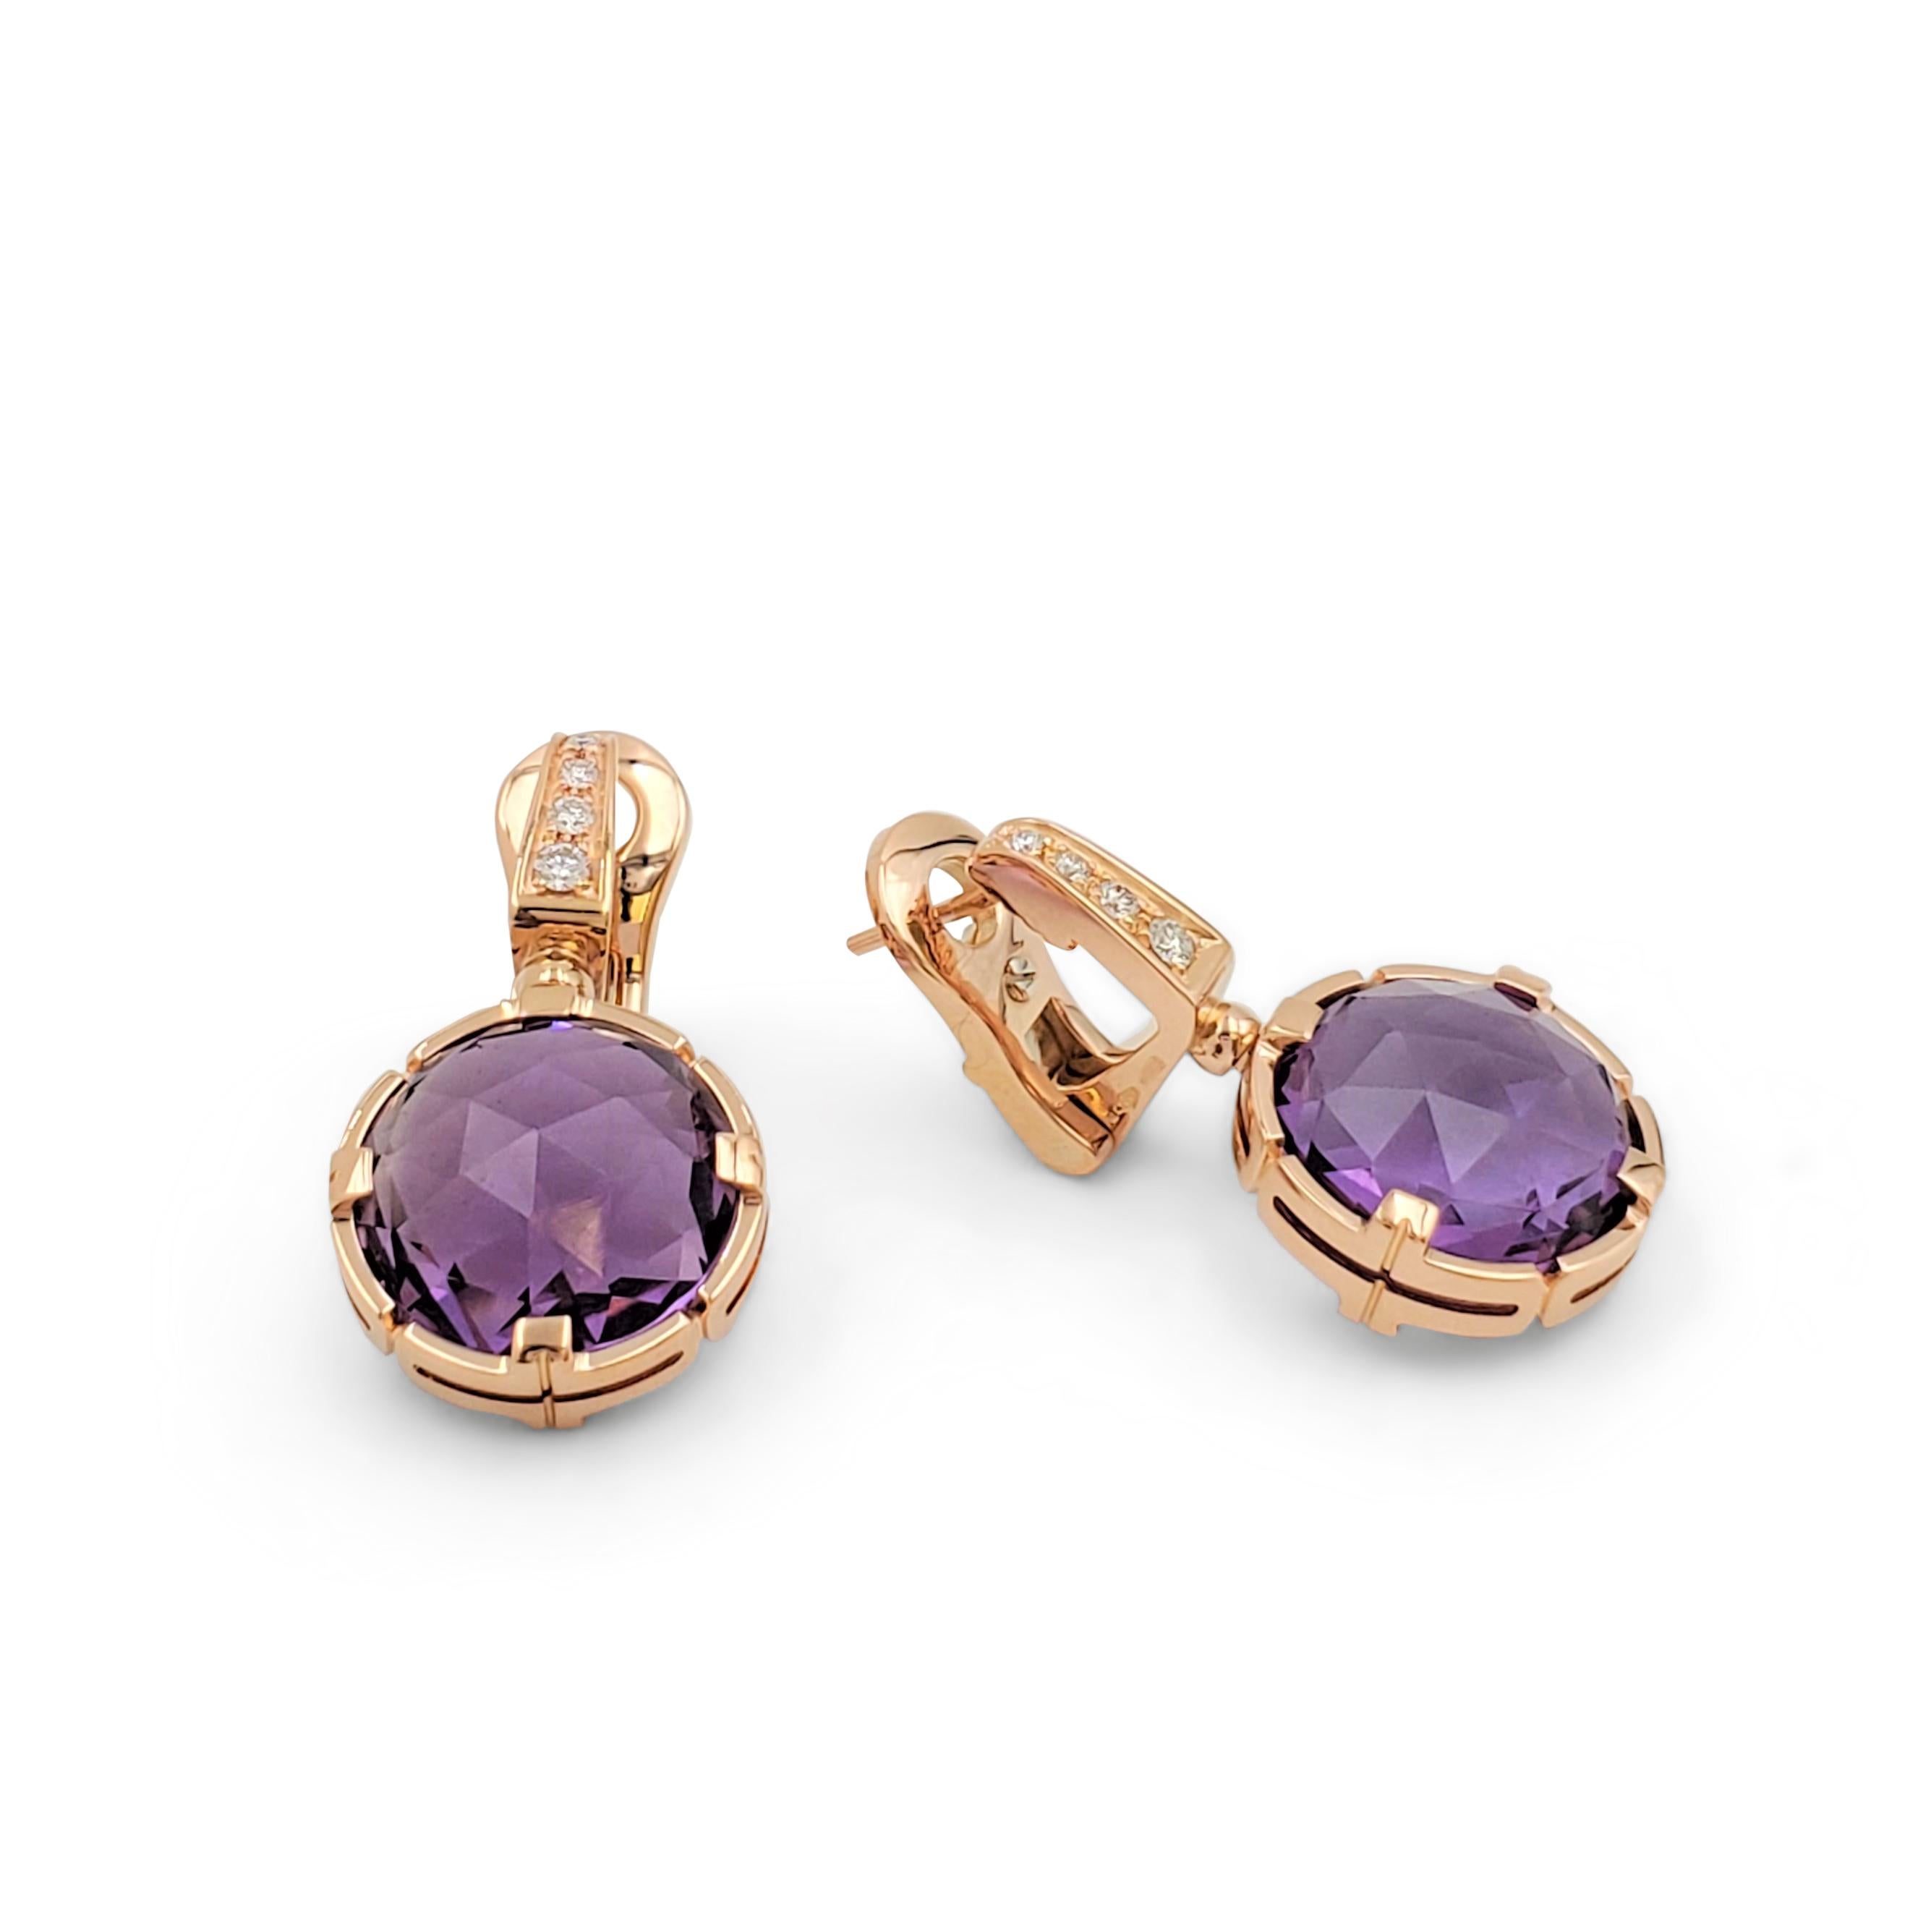 Authentic Bvlgari 'Parentesi Cocktail' Earrings crafted in 18 karat rose gold. Each earring is set with a shimmering rose cut amethyst dropped from a row of tapered bead set round brilliant cut diamonds weighing an estimated 0.18 carats (F color, VS